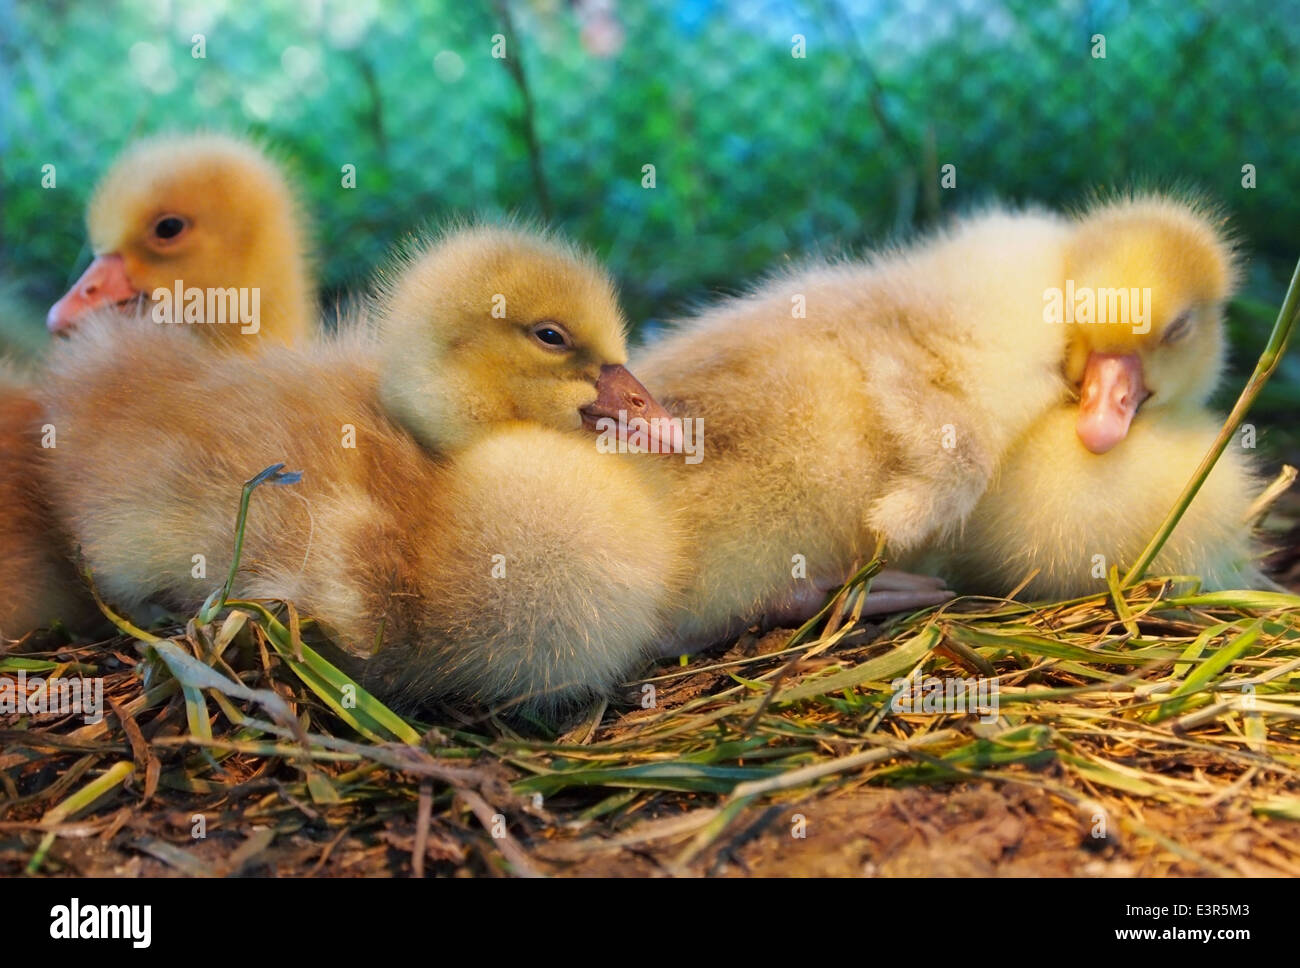 A small group of cute yellow fuzzy baby ducks nestled together in some grasses and straw. Stock Photo